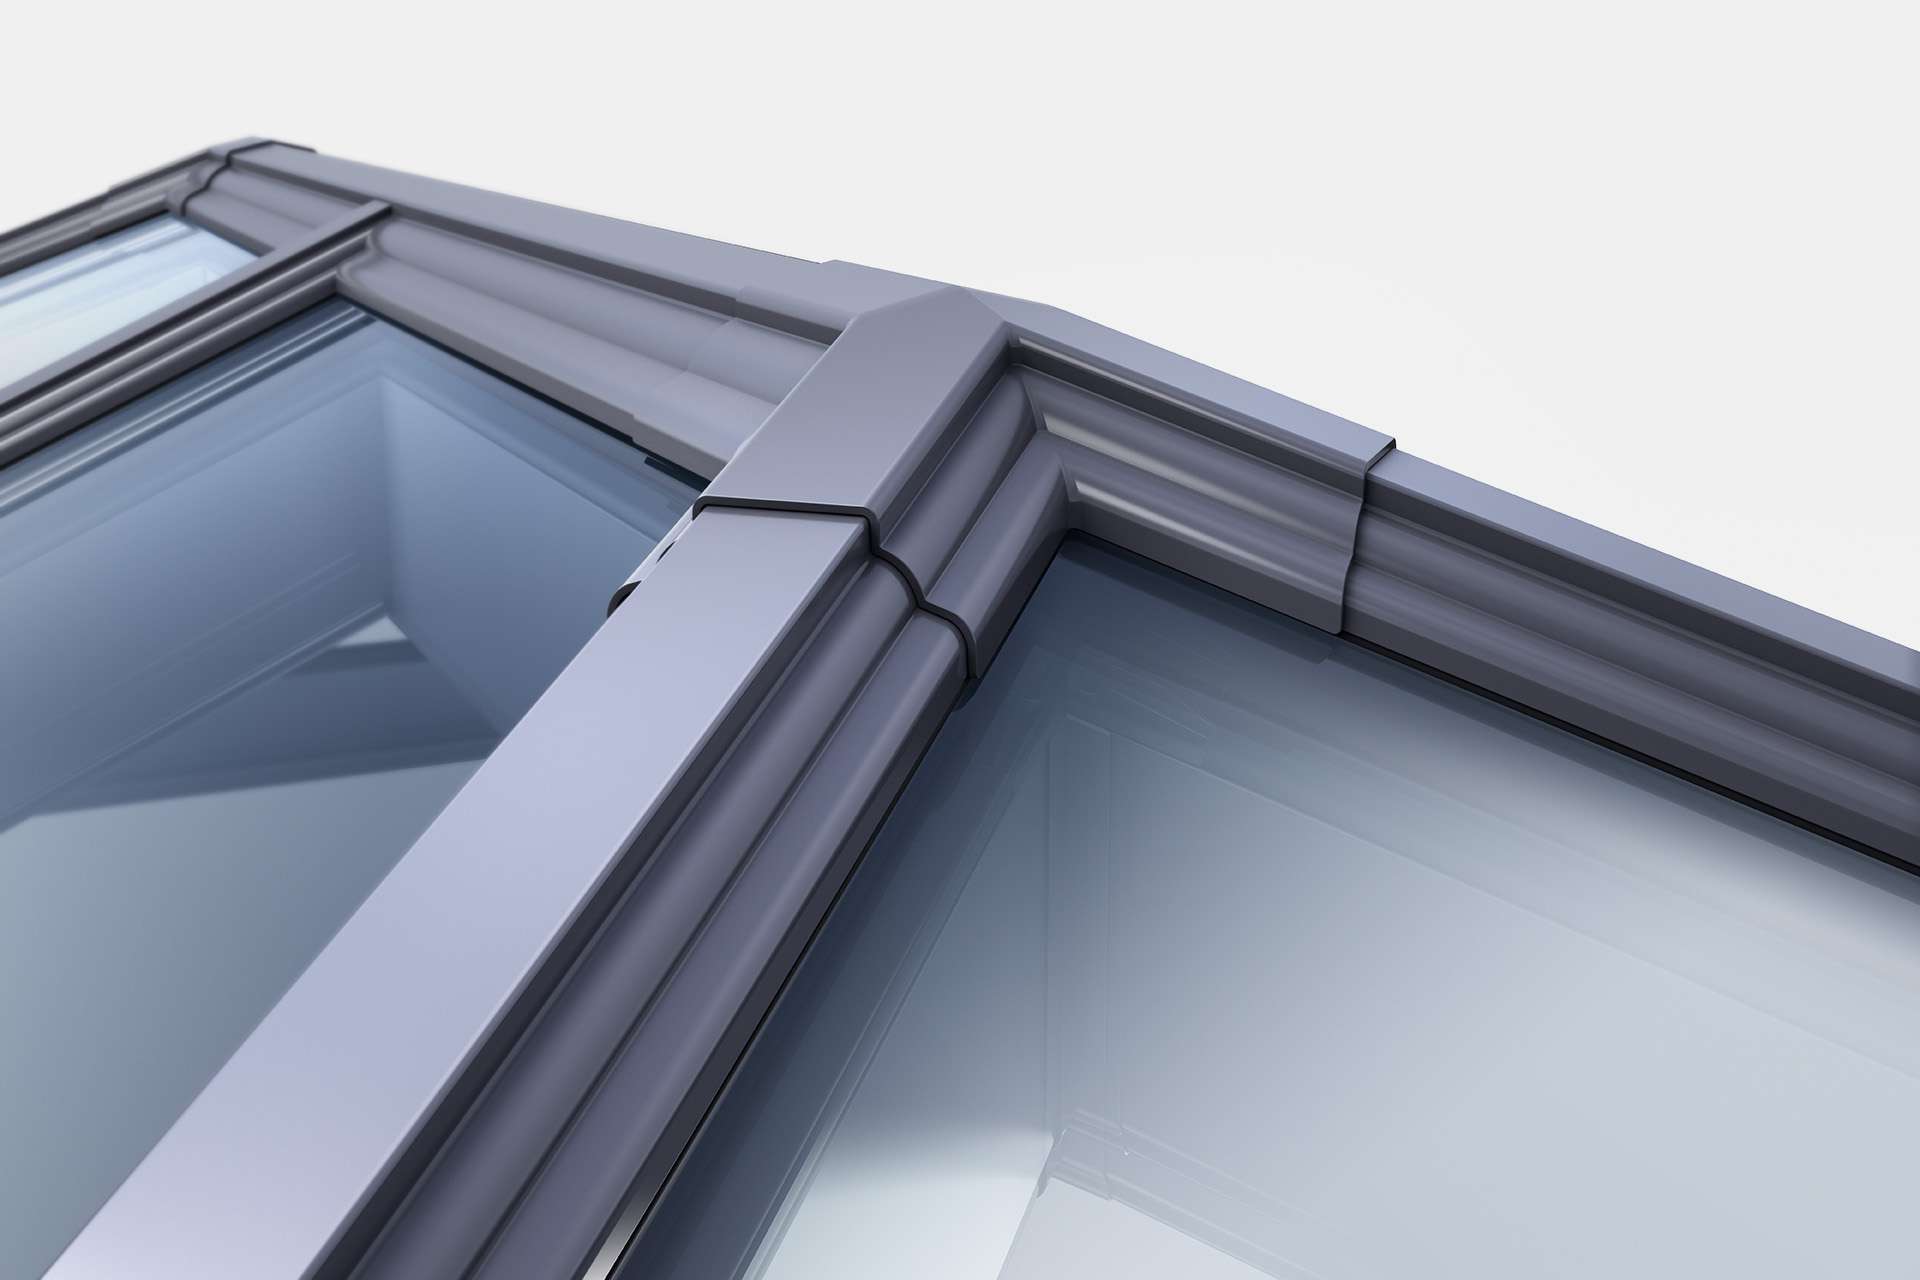 A close up of the exterior top caps of the Korniche roof lantern, showing the detail of the product.